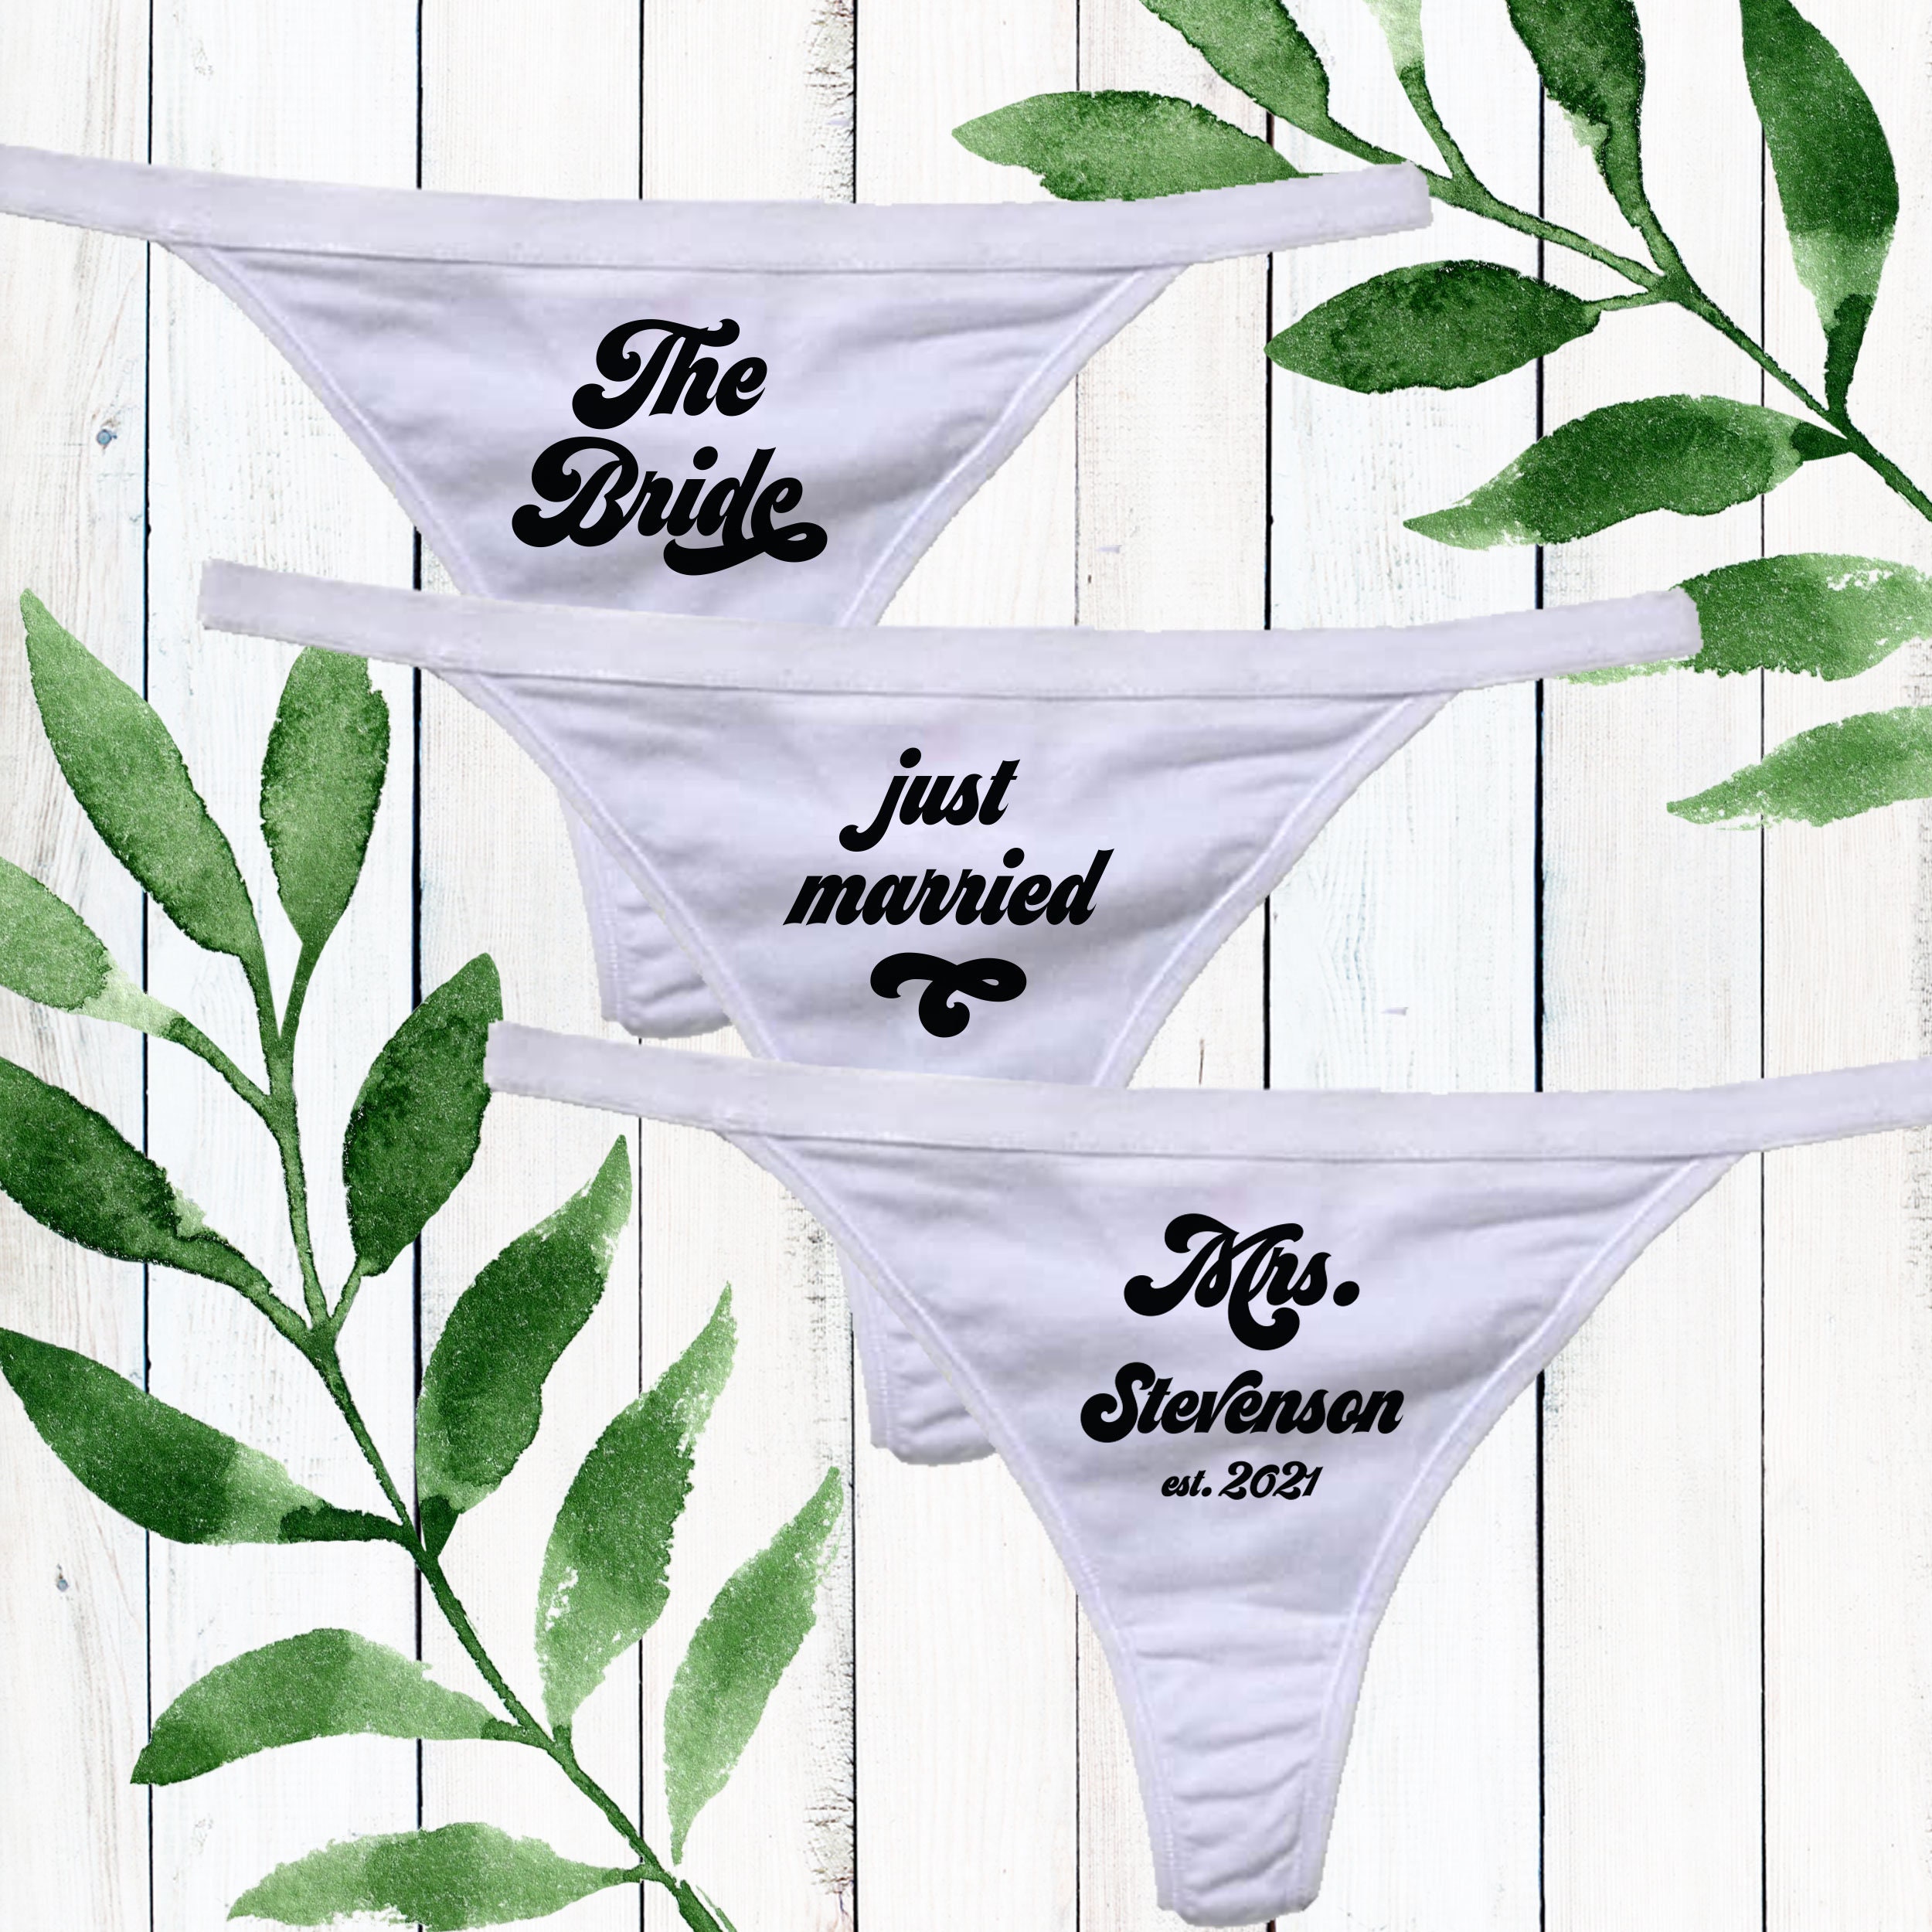 Bless This Meal Thong - Praying Over This Meal Thong - Funny Thong Gift